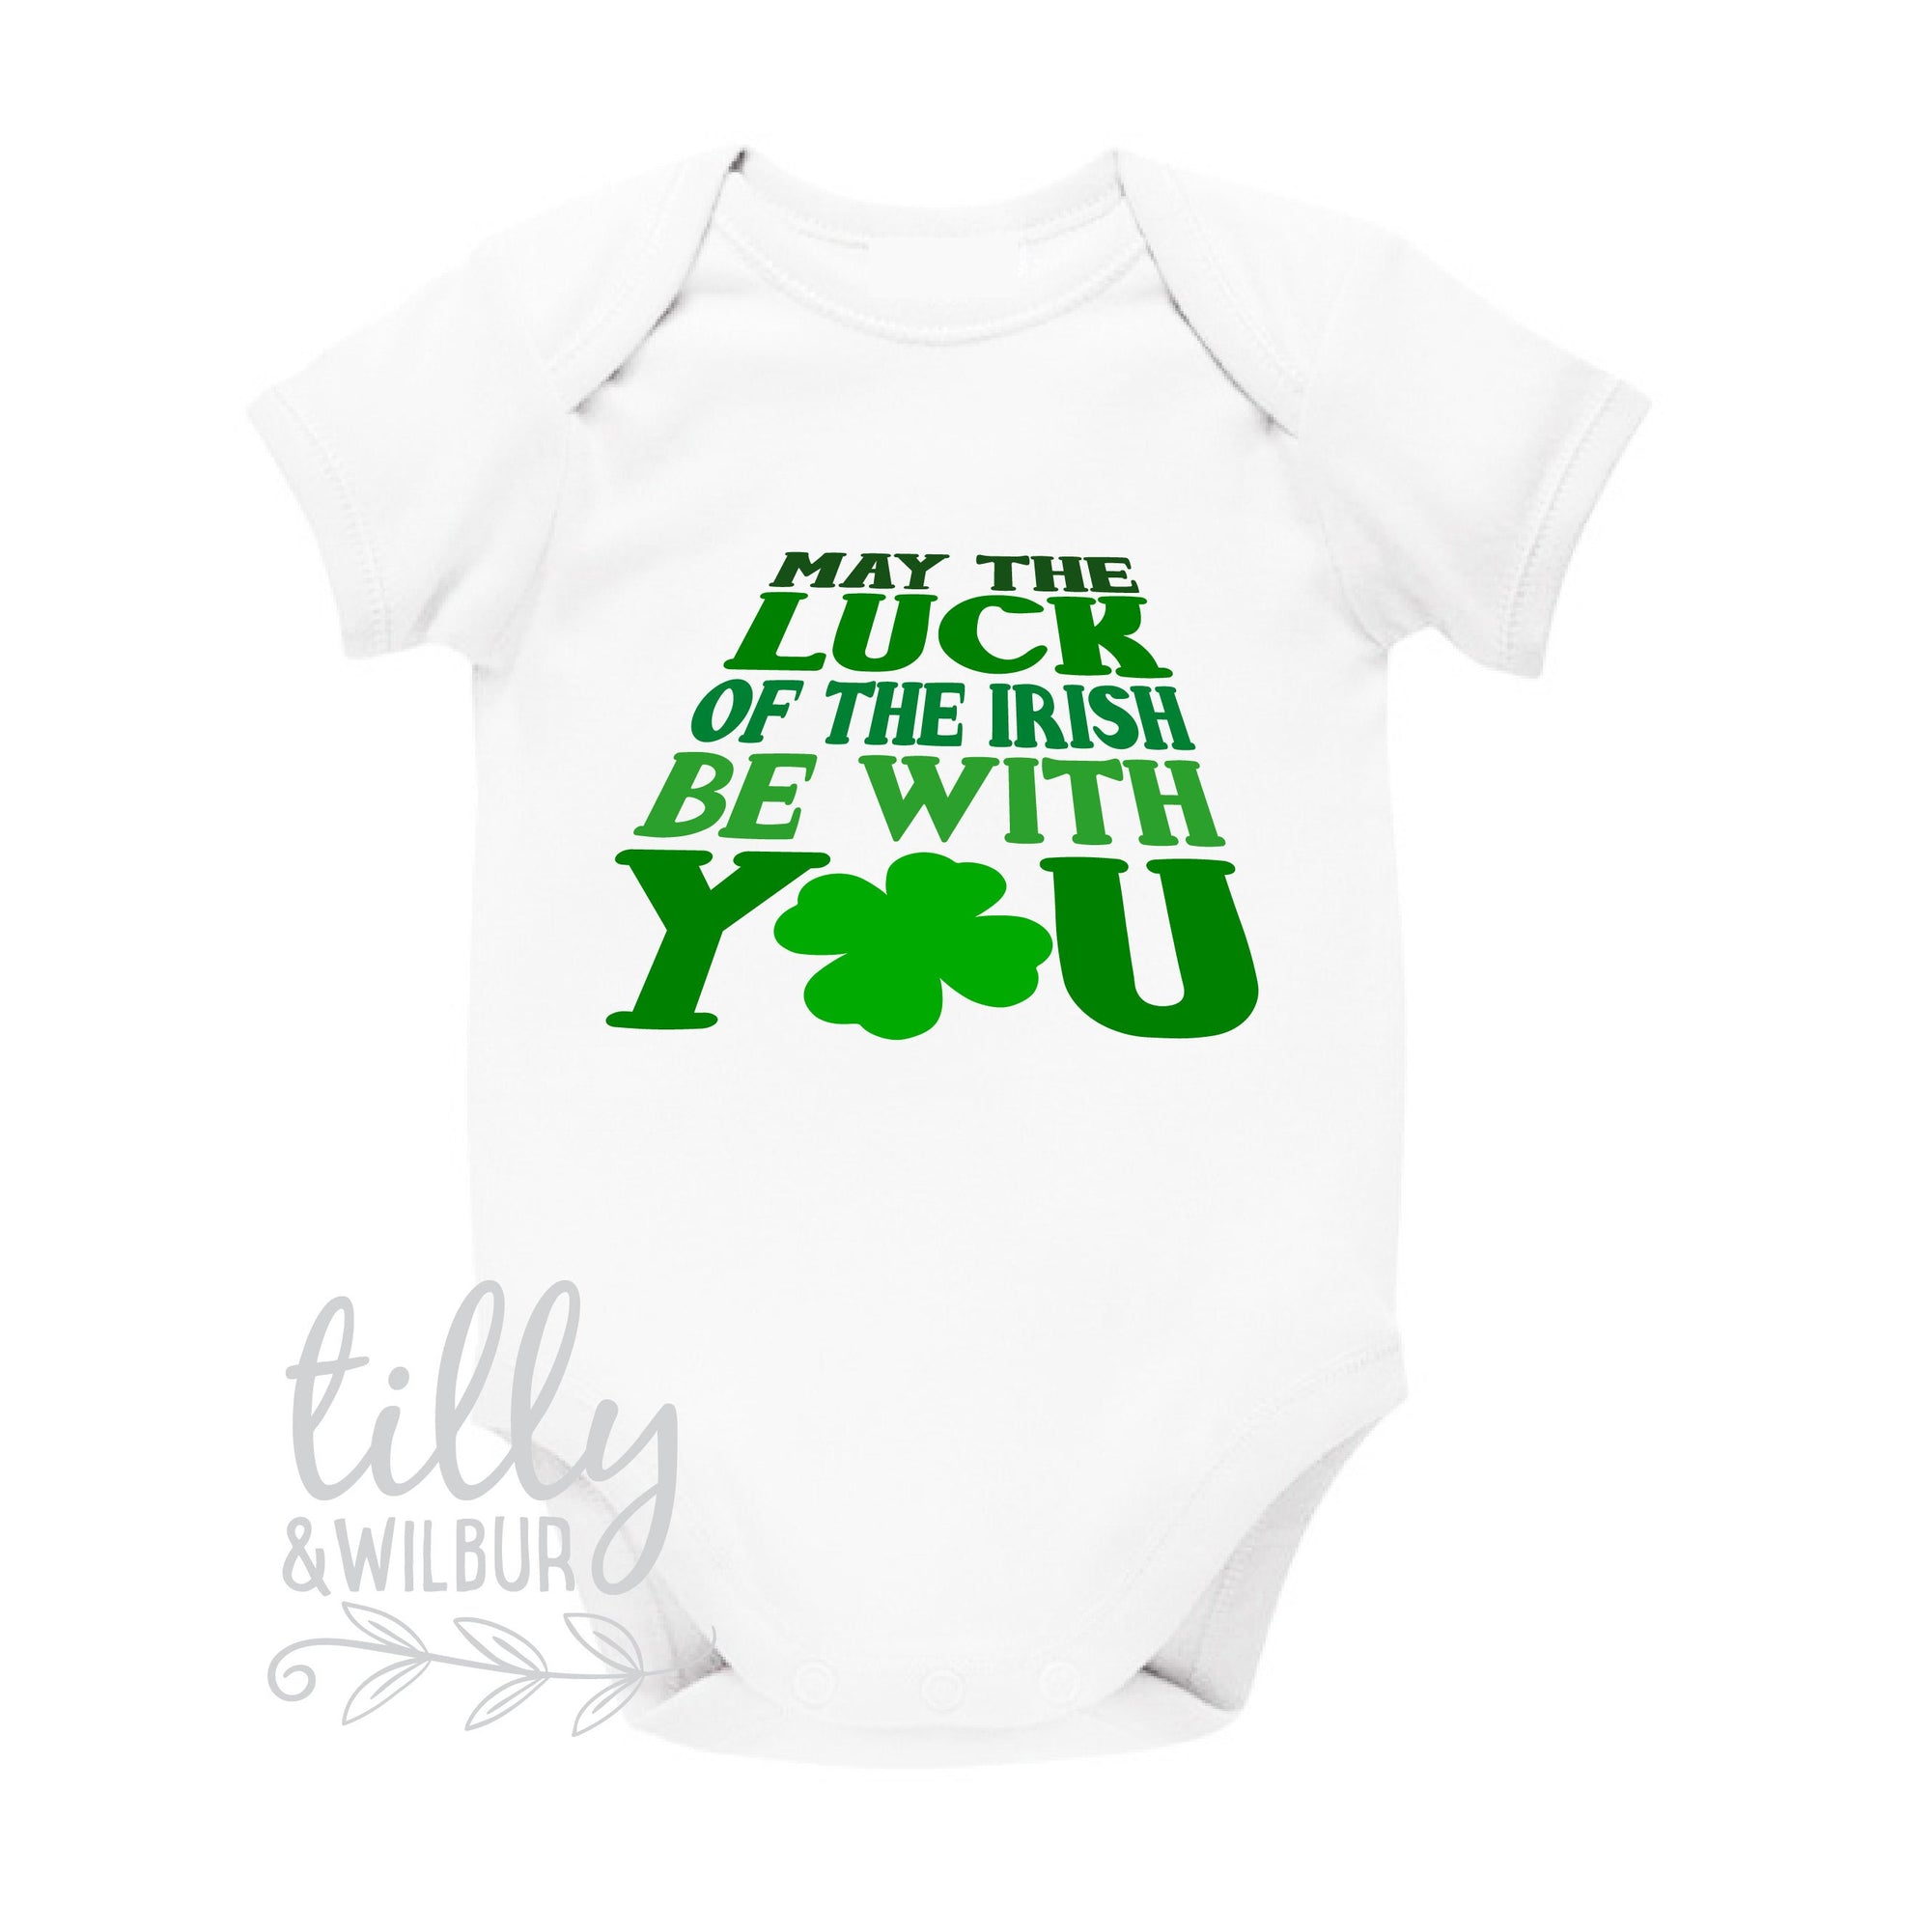 May The Luck Of The Irish Be With You Baby Bodysuit, St Patrick's Day Baby Outfit, Happy St Paddy's Day, Ireland, Celtic, St Patrick, Paddy